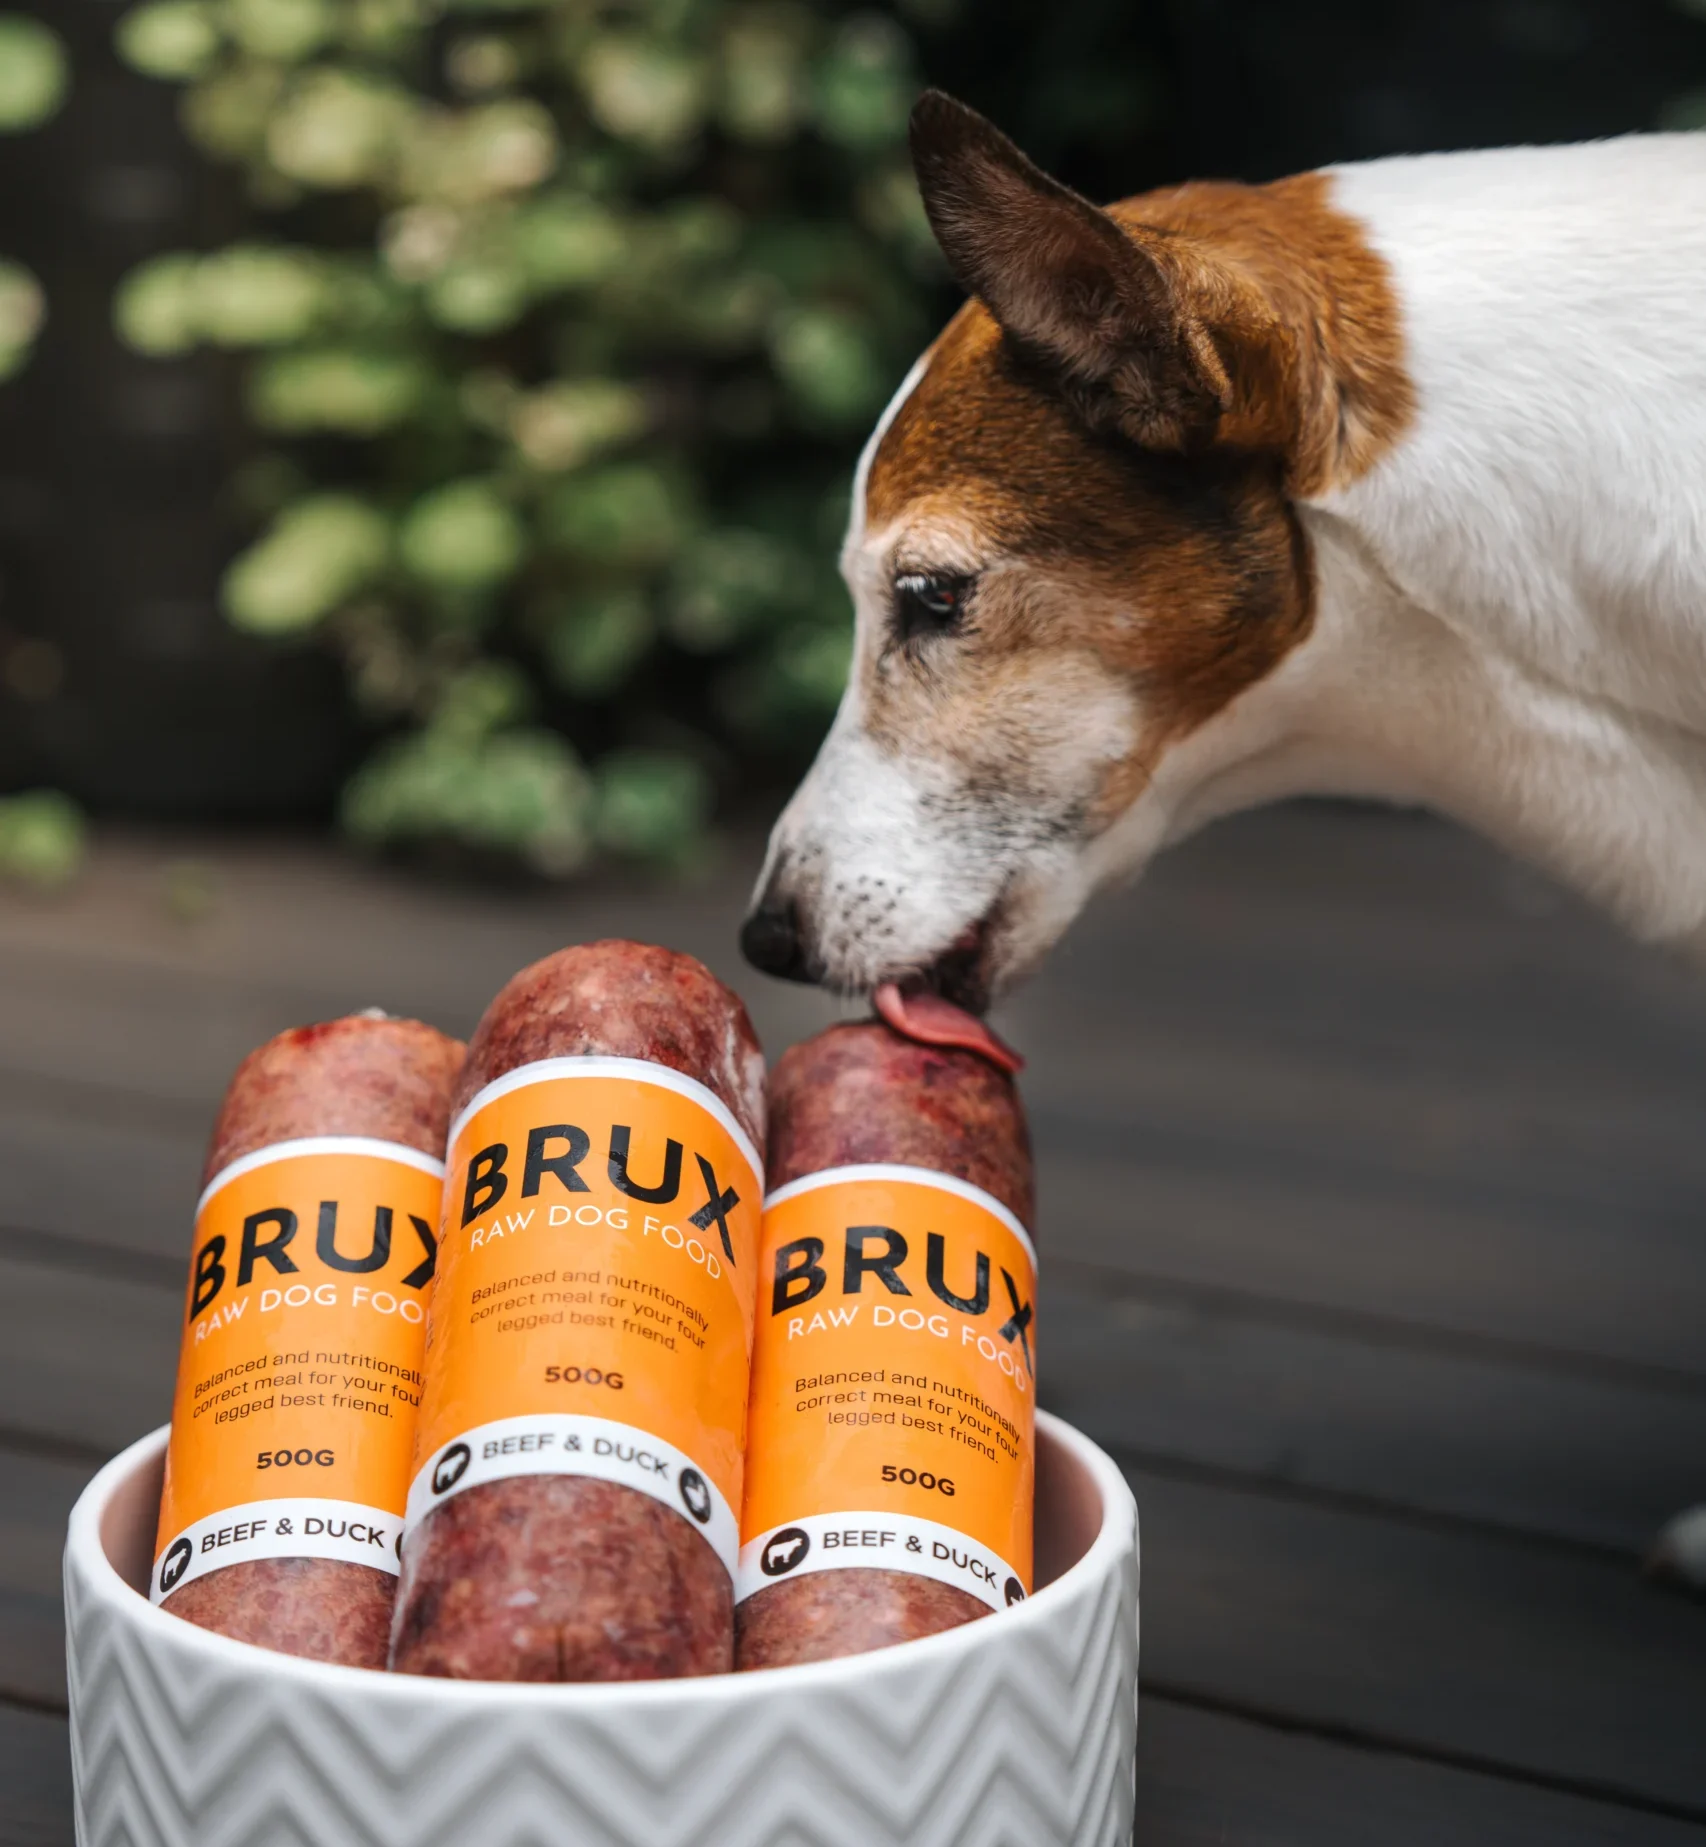 A 15 year old jack russell terrier licking BRUX raw dog food